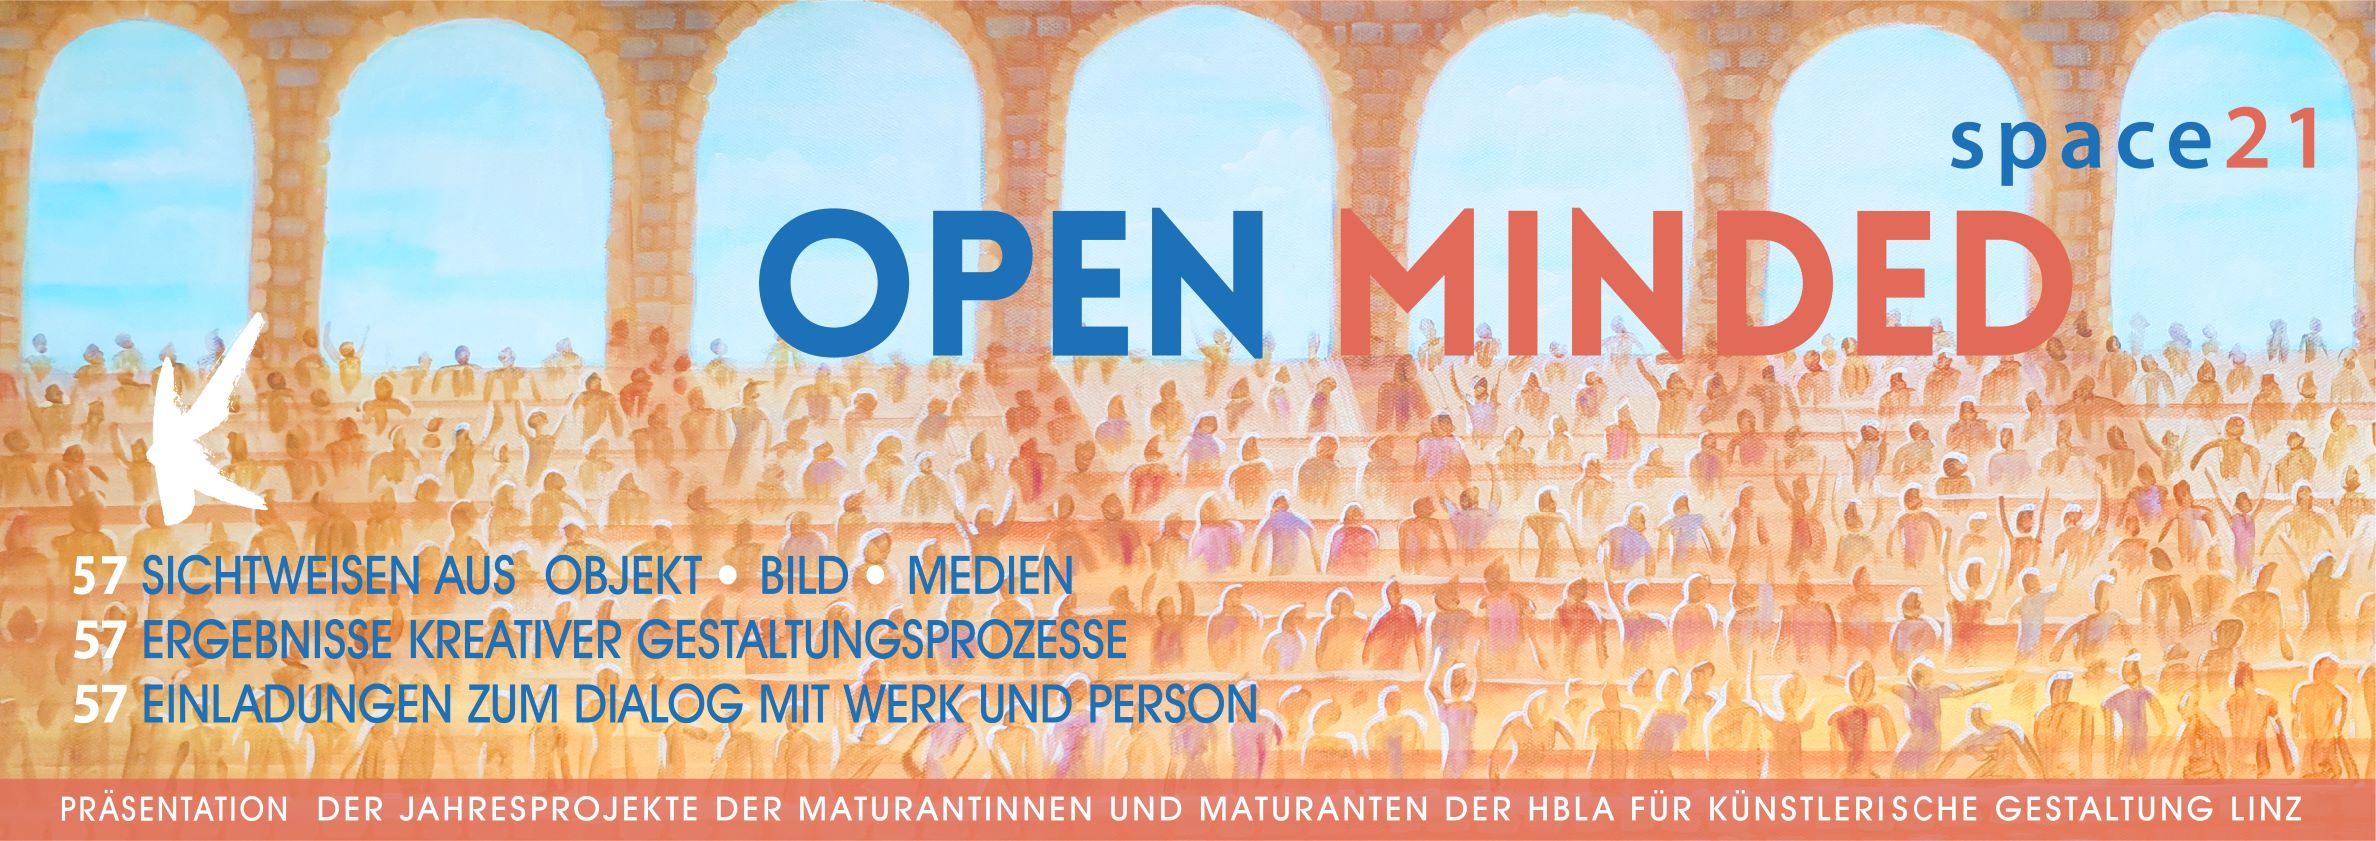 Open Minded 2020